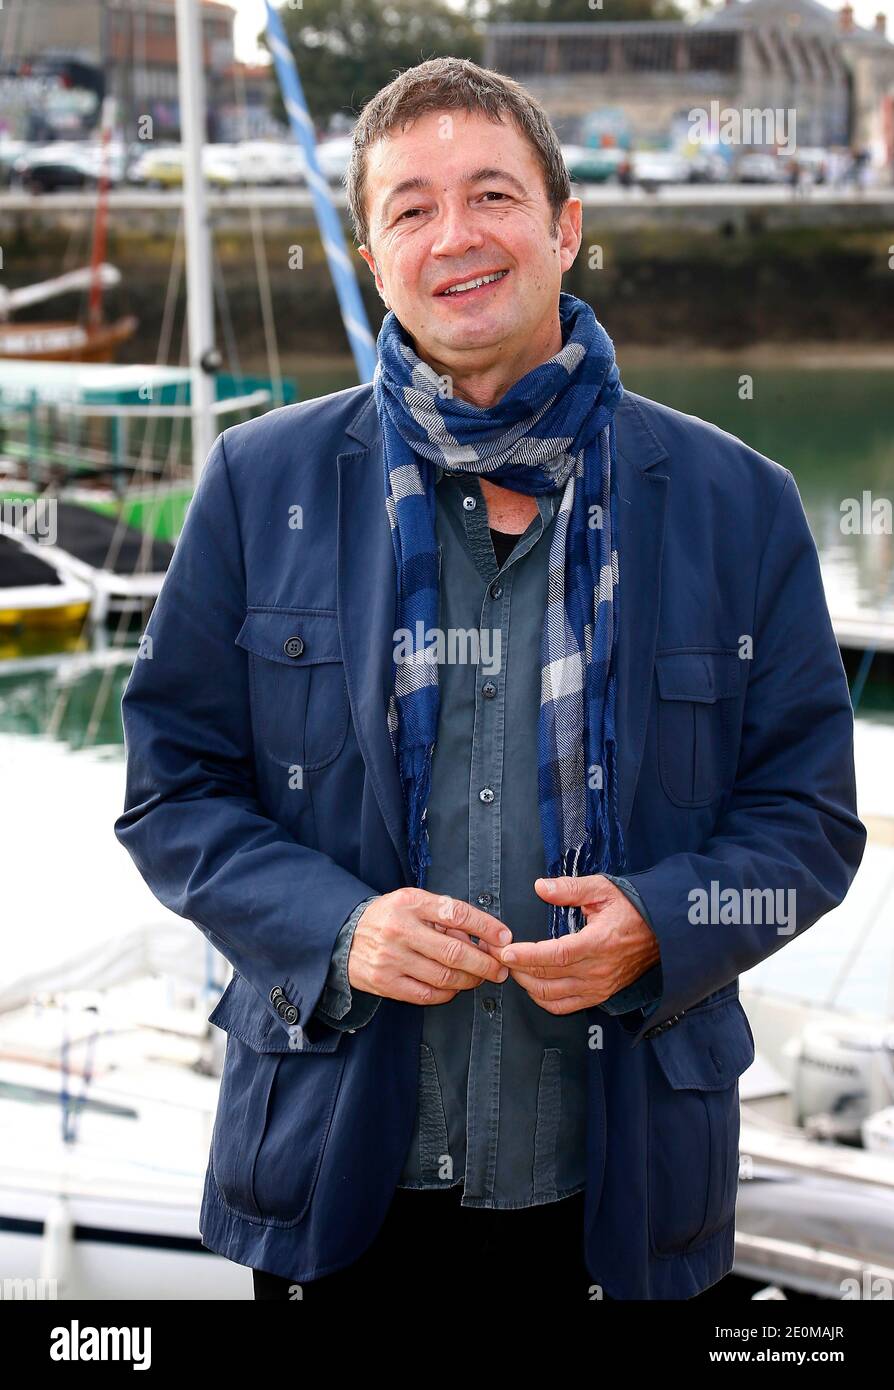 Frederic Bouraly for ' Scenes de menages' attending the 14th Festival of TV Fiction in La Rochelle, France, on September 15, 2012. Photo by Patrick Bernard/ABACAPRESS.COM Stock Photo